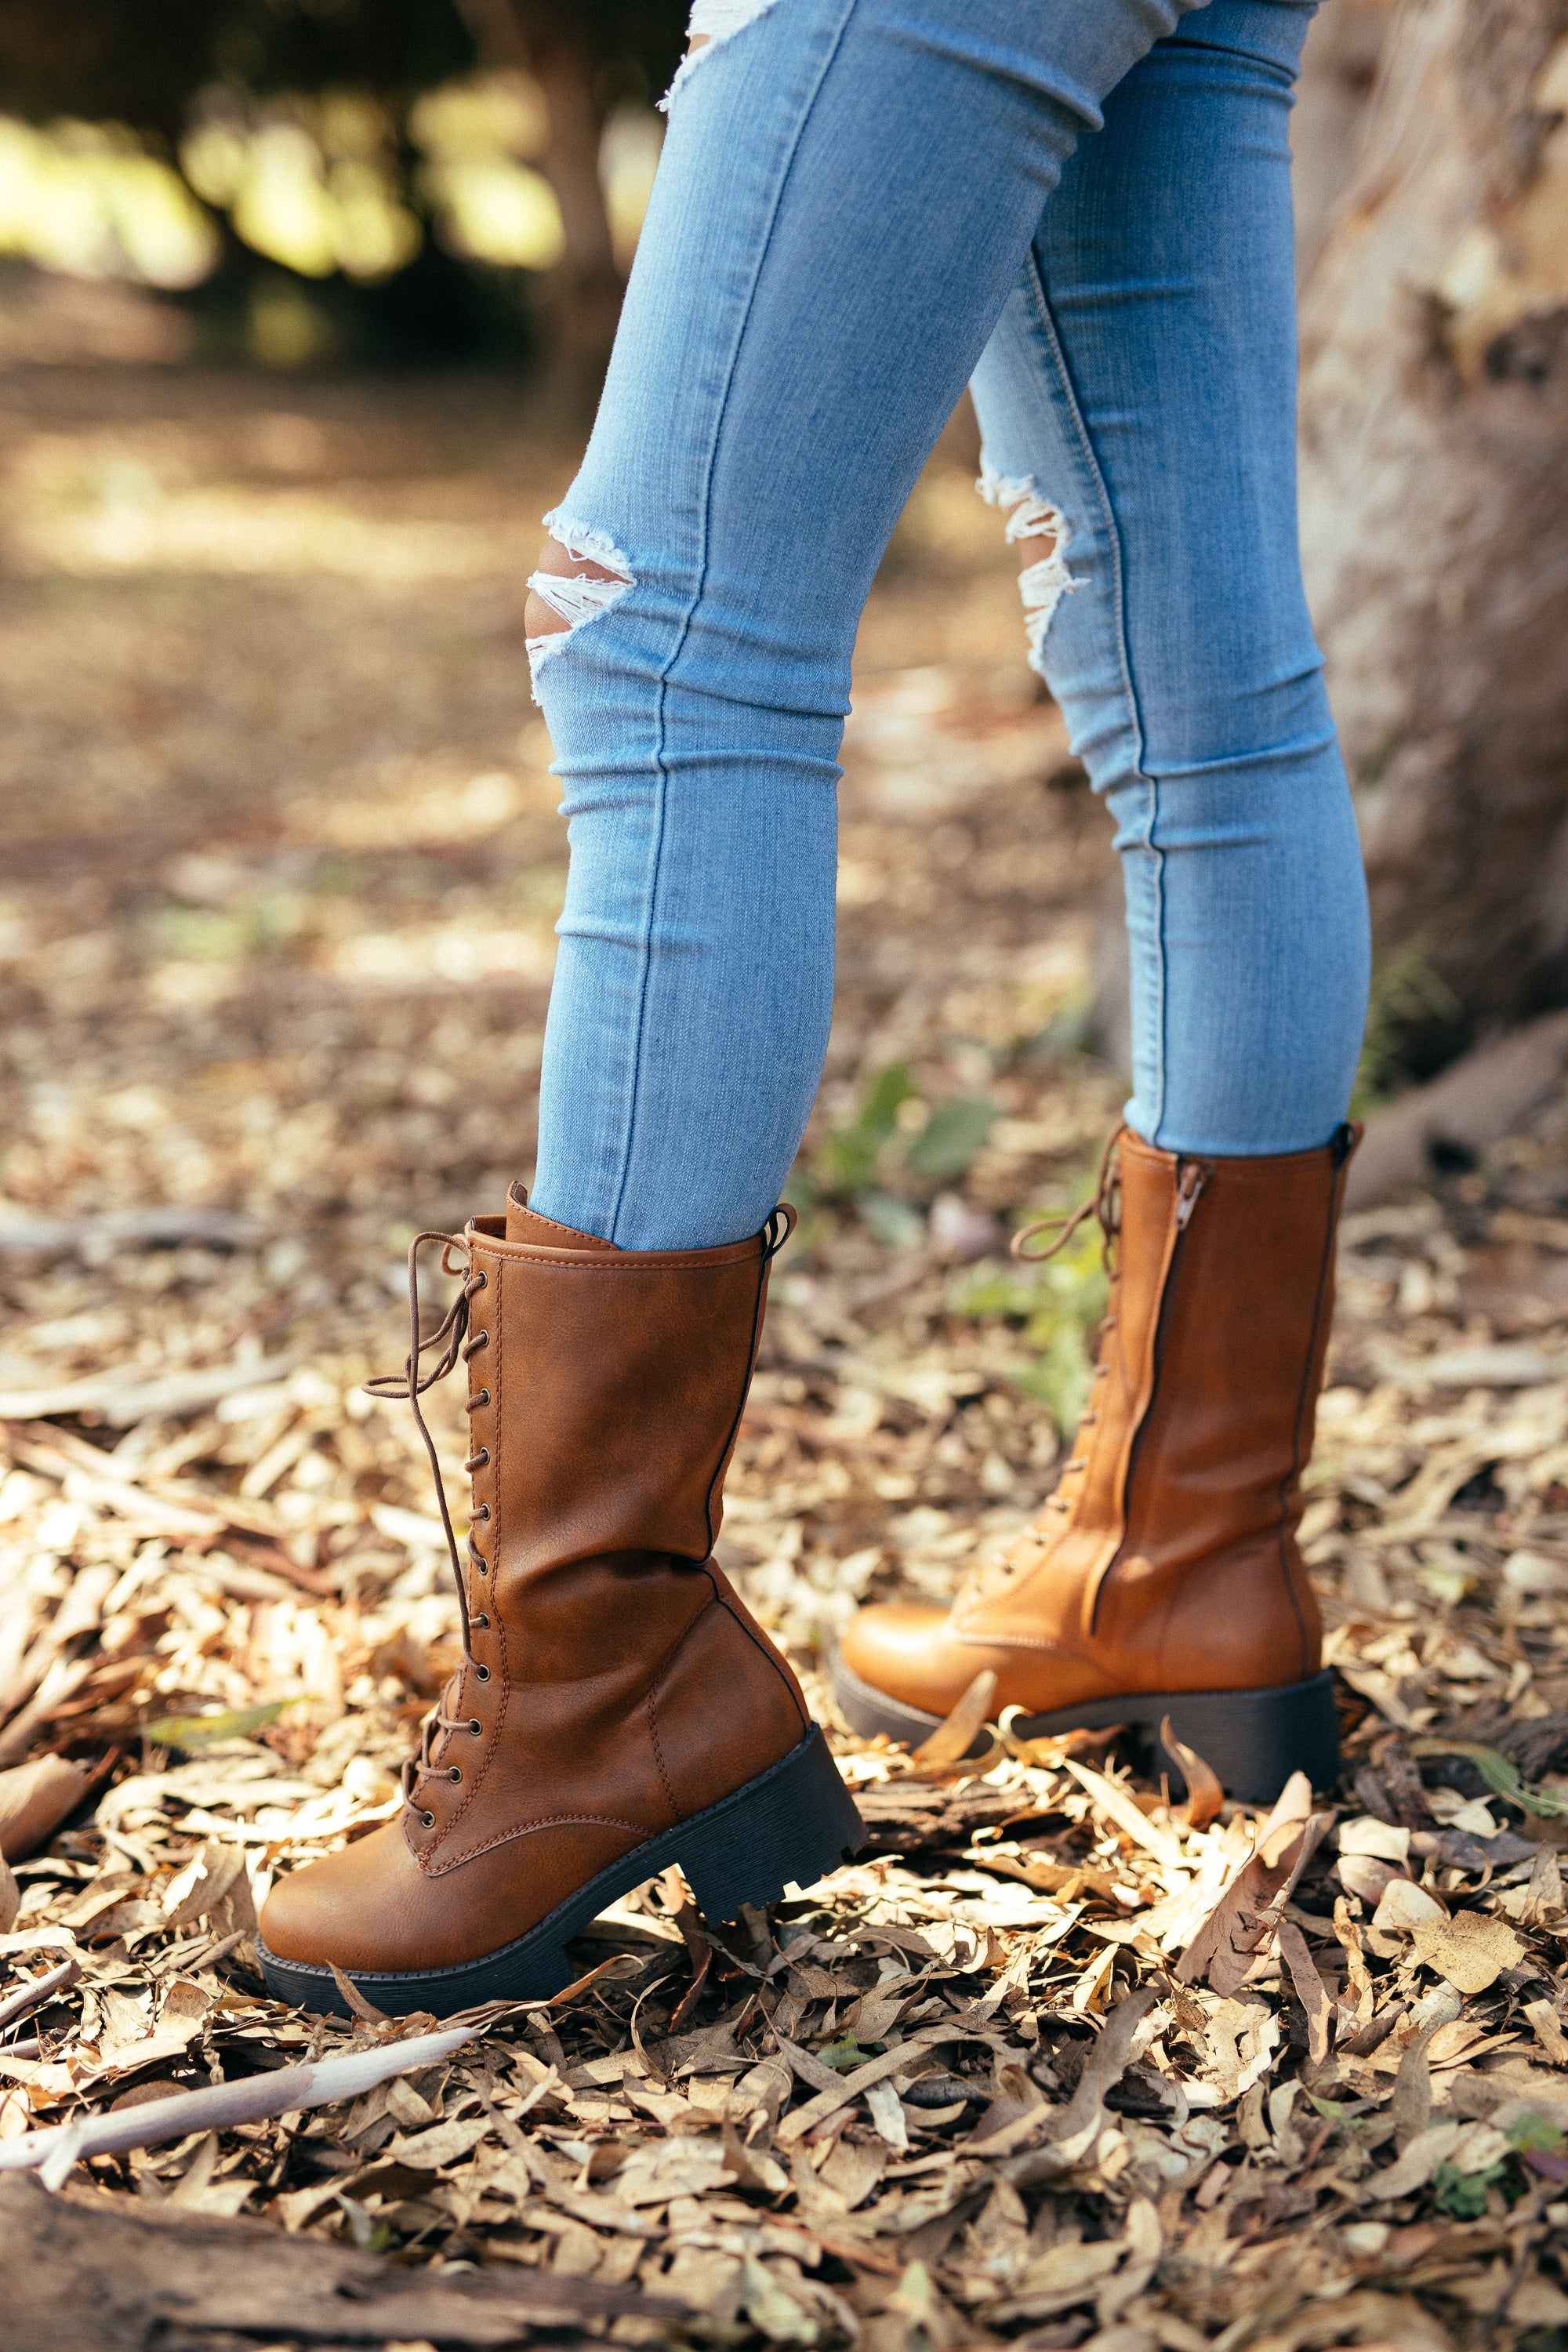 Buy Women's Private Boots Camel by Nest Shoes